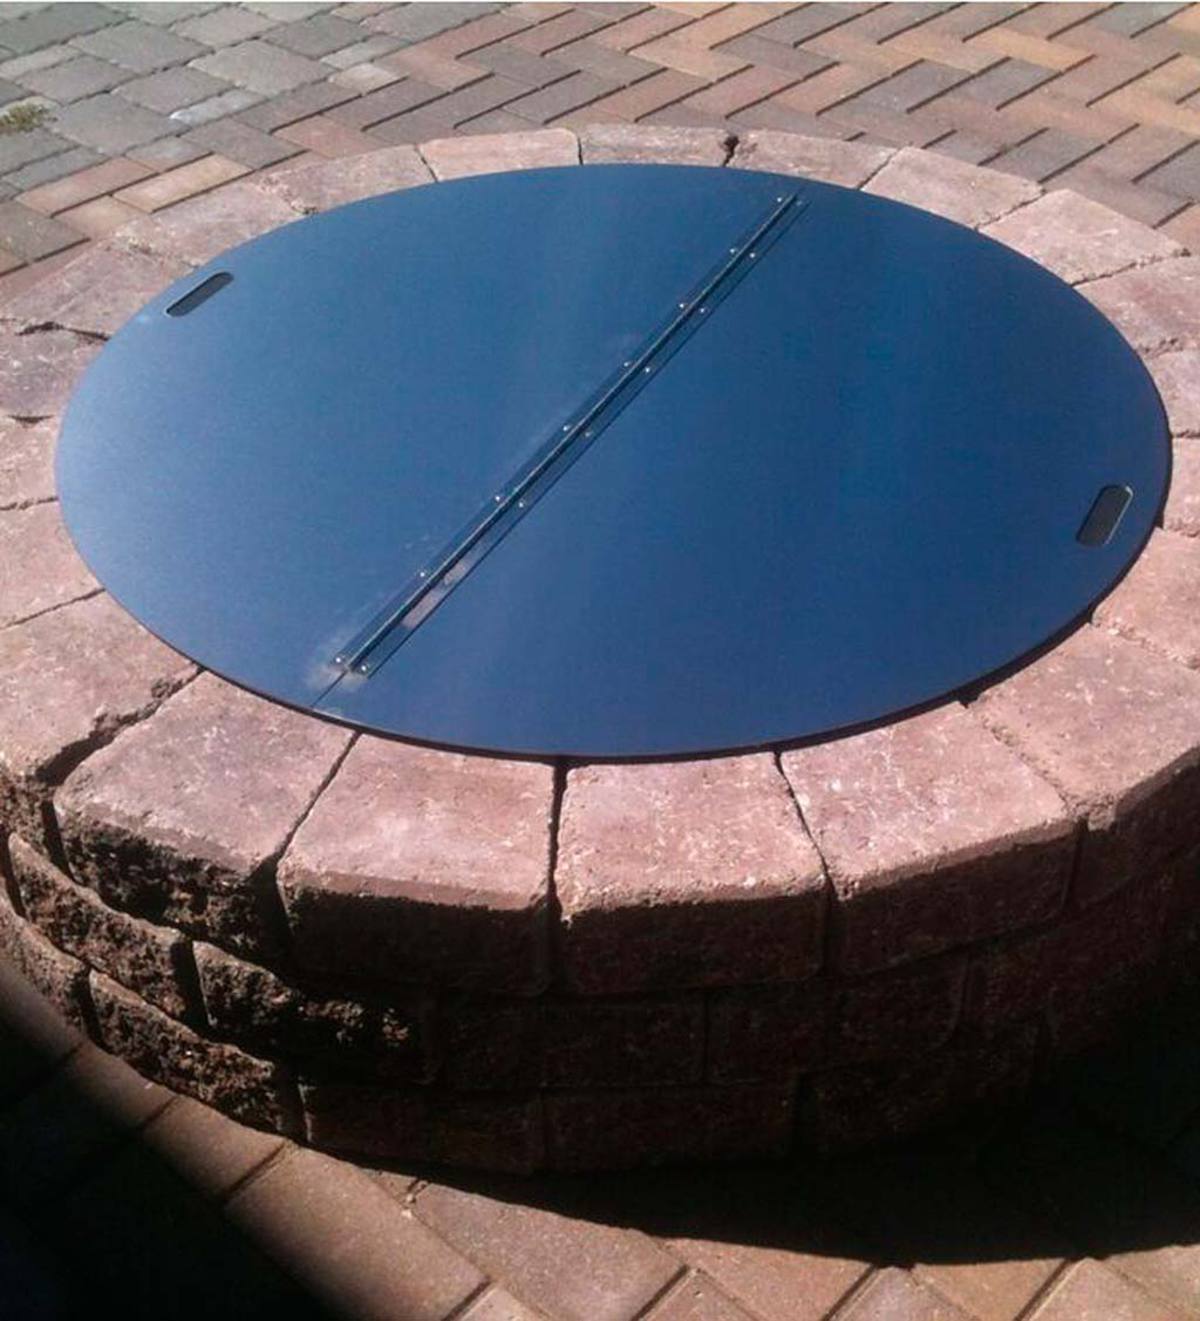 Stainless Steel Round Fire Pit Cover, Canyon Ridge Fire Pit Cover